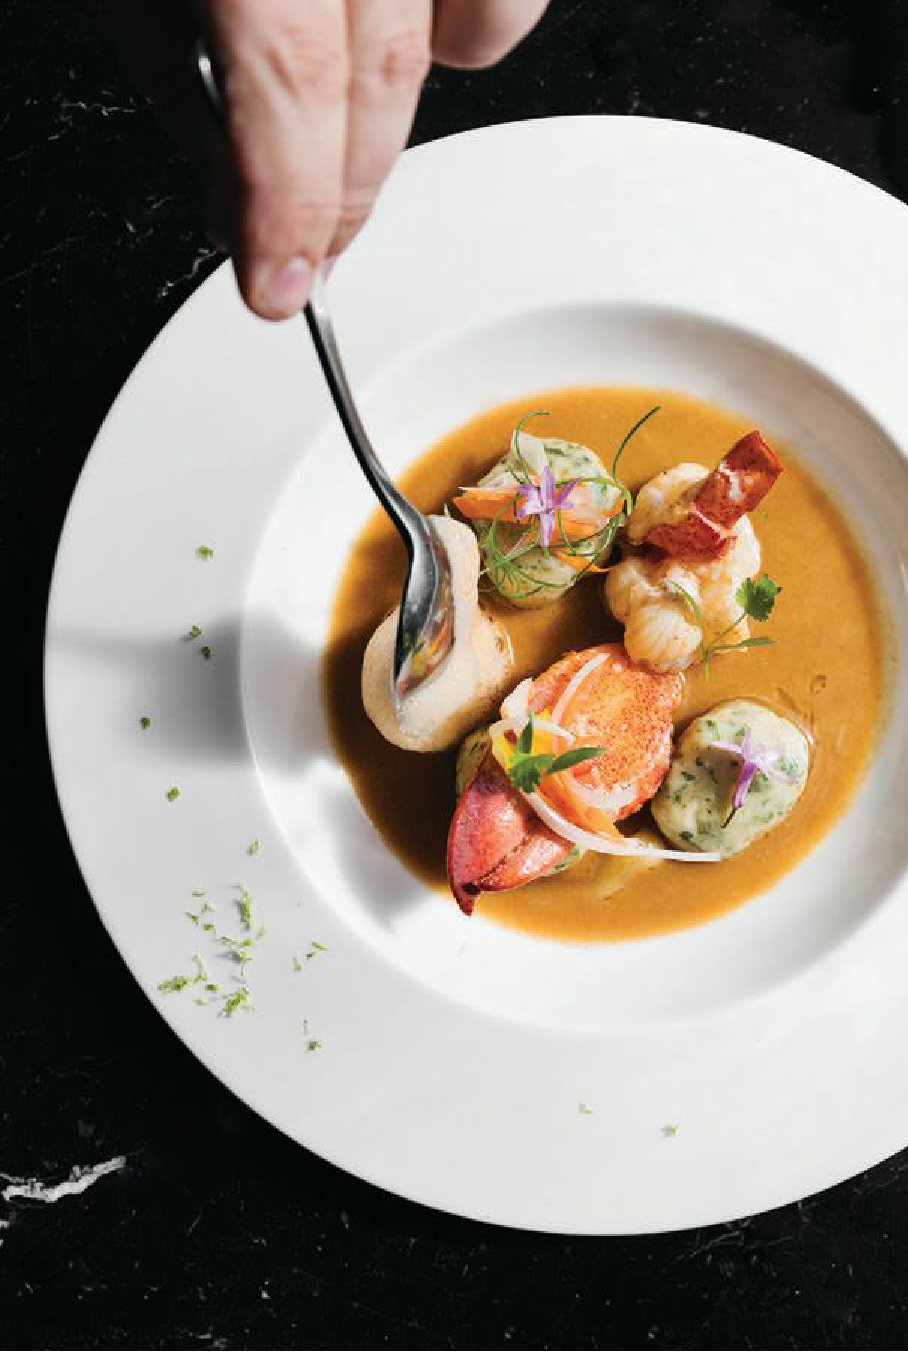 Marché Moderne serves inventive dishes like Thai lobster. PHOTO: BY DYLAN   JENI